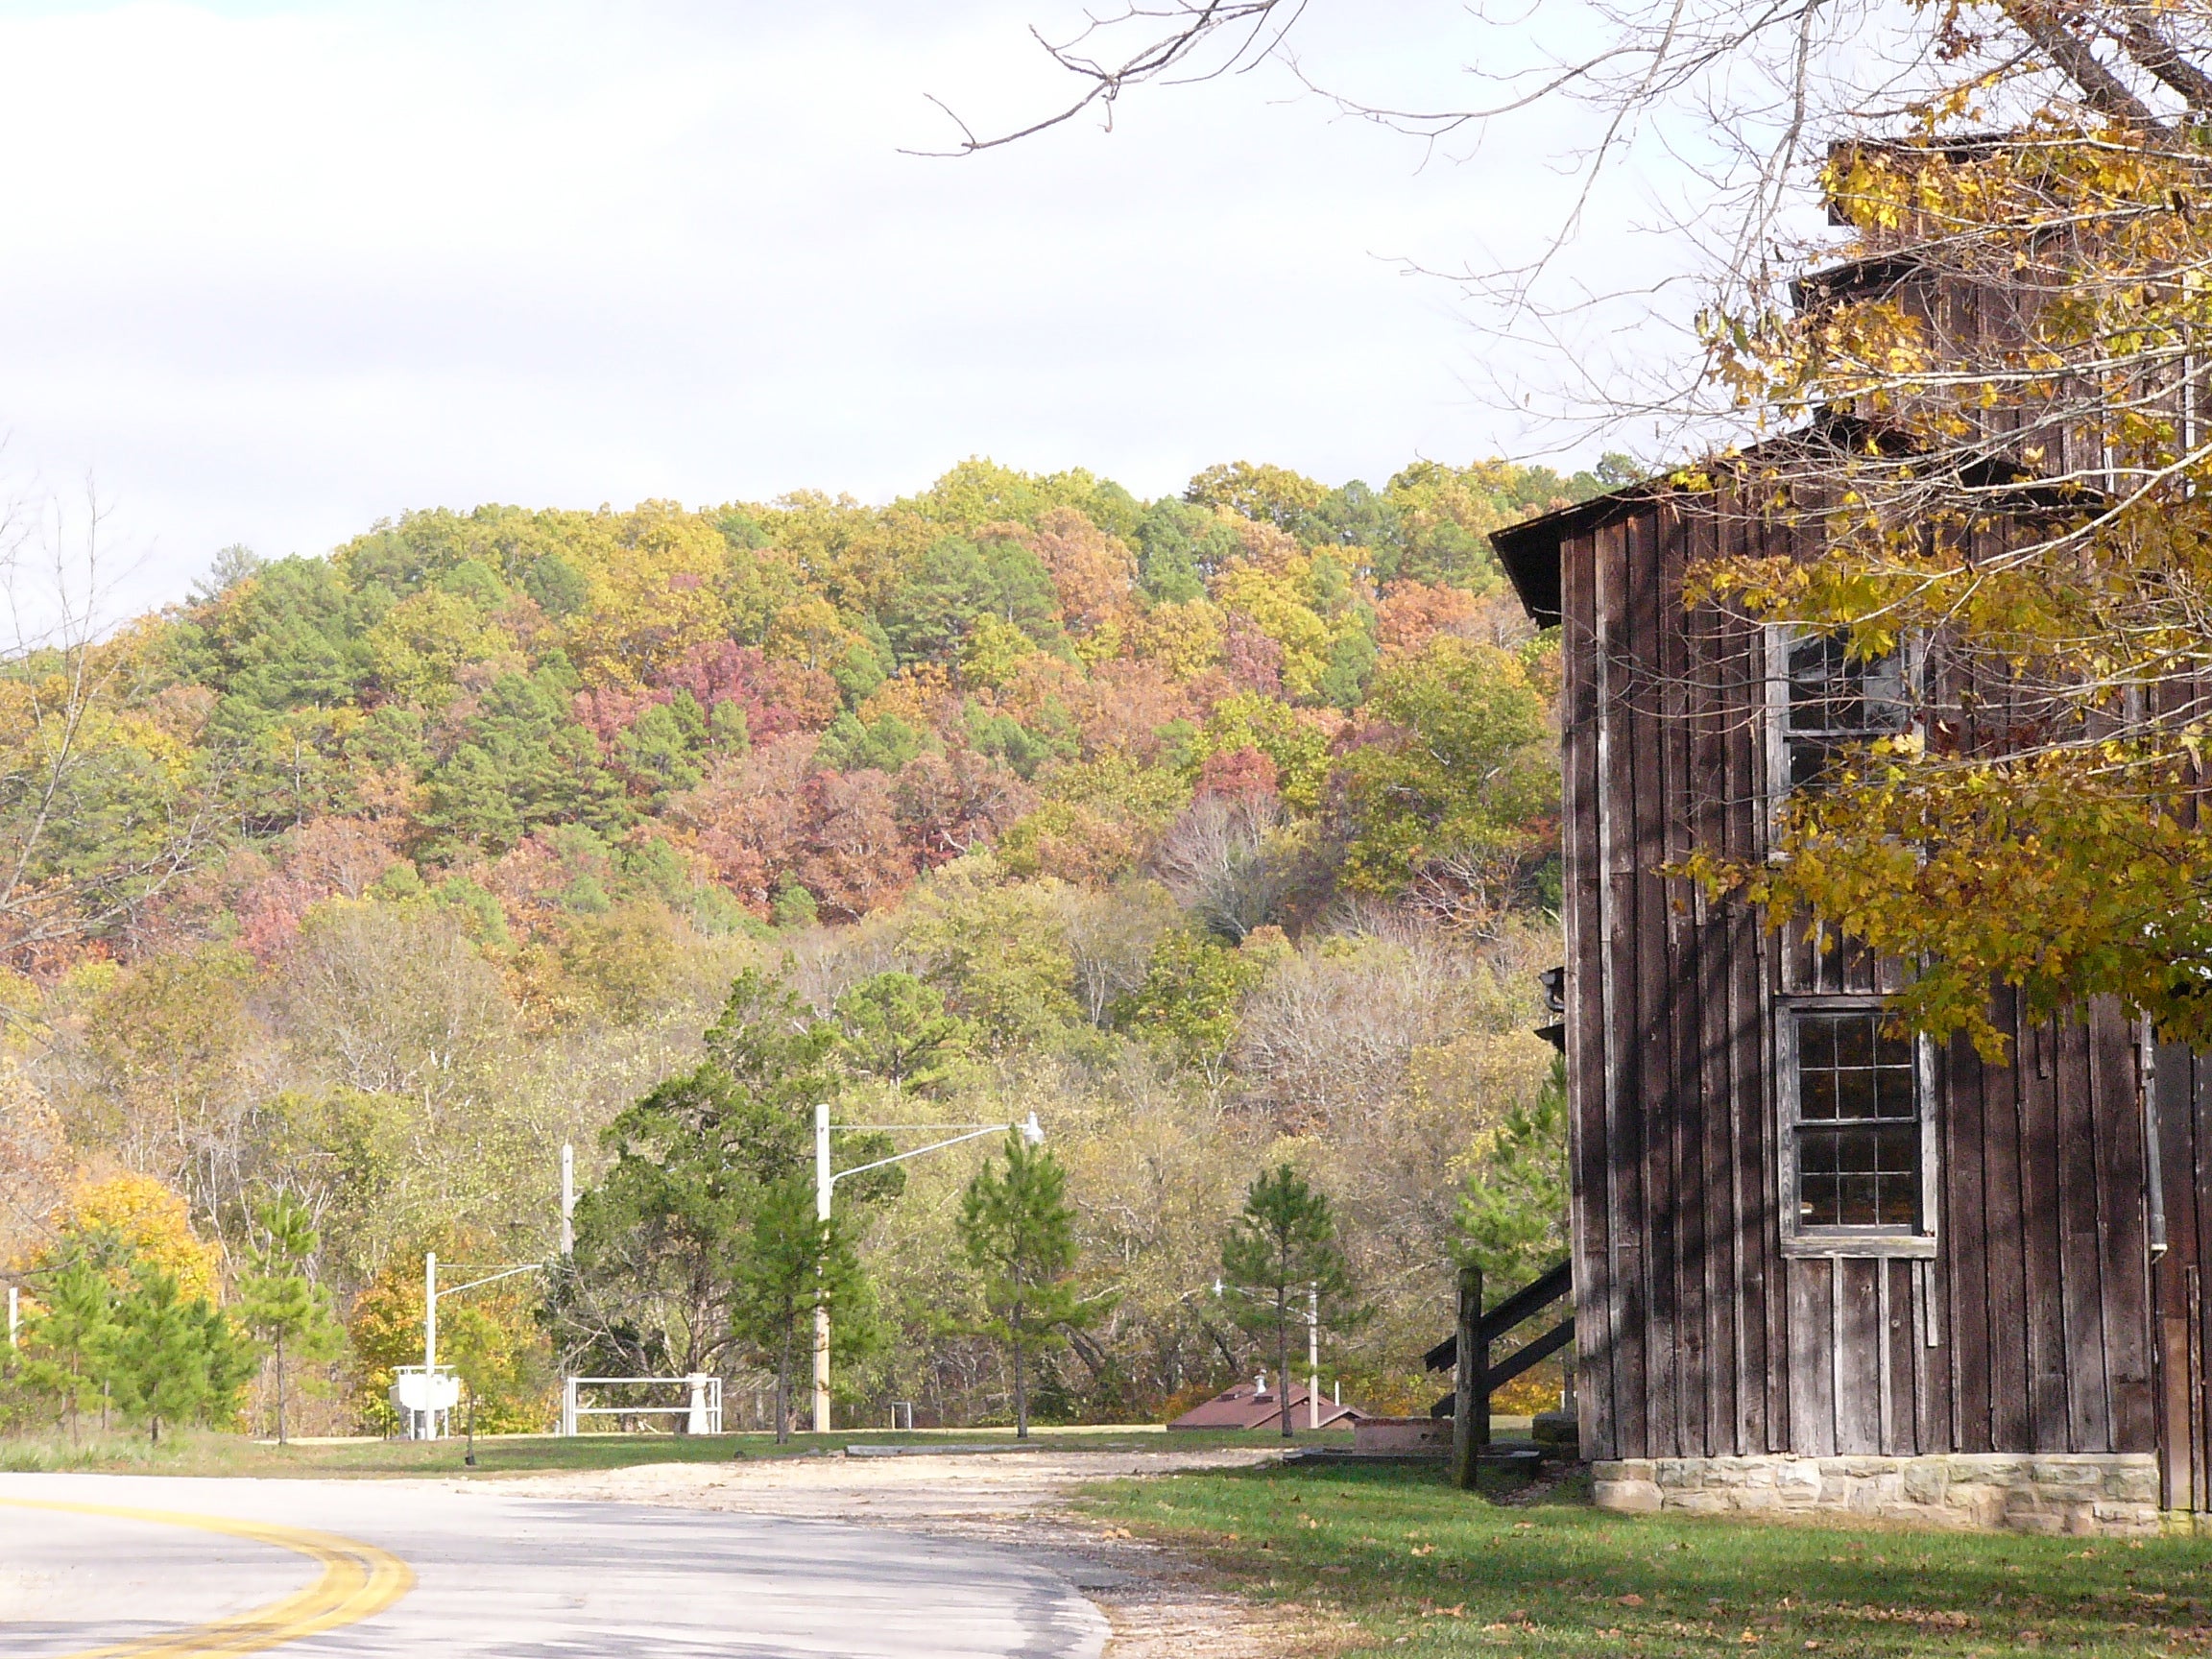 Early autumn at the  old mill in the Ozark hills